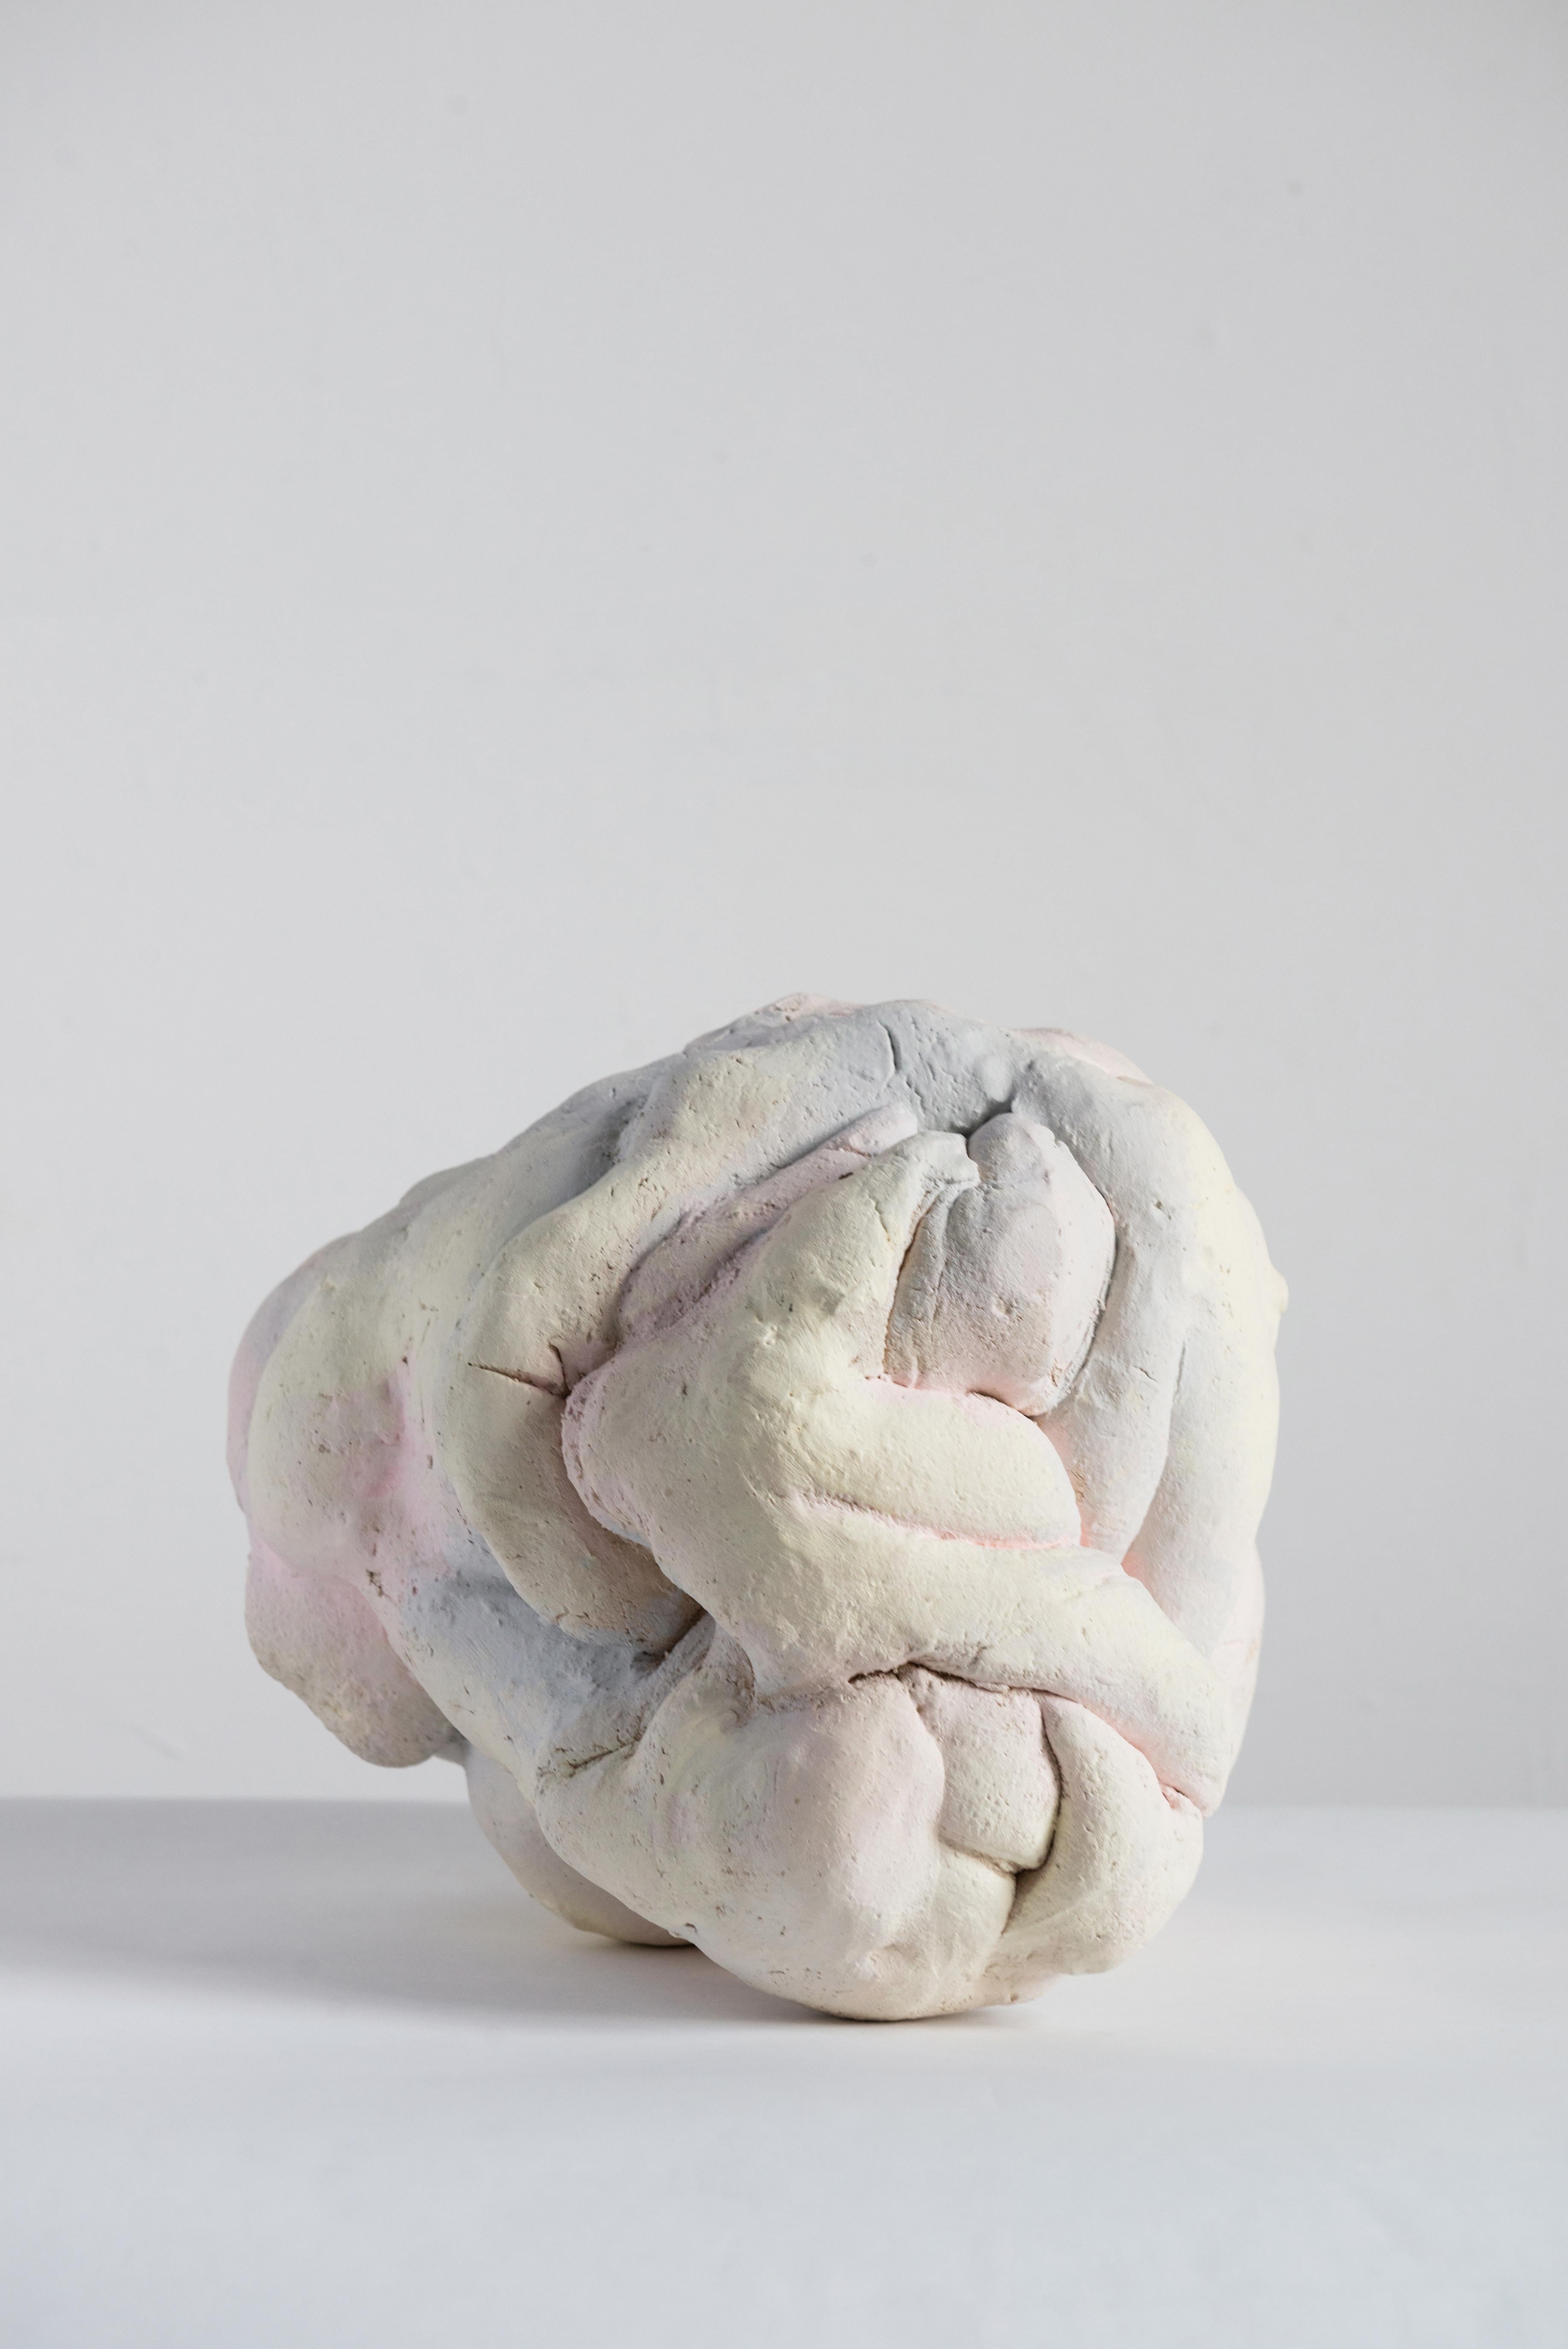 Liquid sky sculpture by Natasja Alers, 2020.
Dimensions: 31 x 35 x 29 cm
Material: Ceramics, engobes.

Visual artist Natasja Alers (The Hague, 1987) graduated from the Gerrit Rietveld Academy in the field of ceramics. Alers makes casts of human